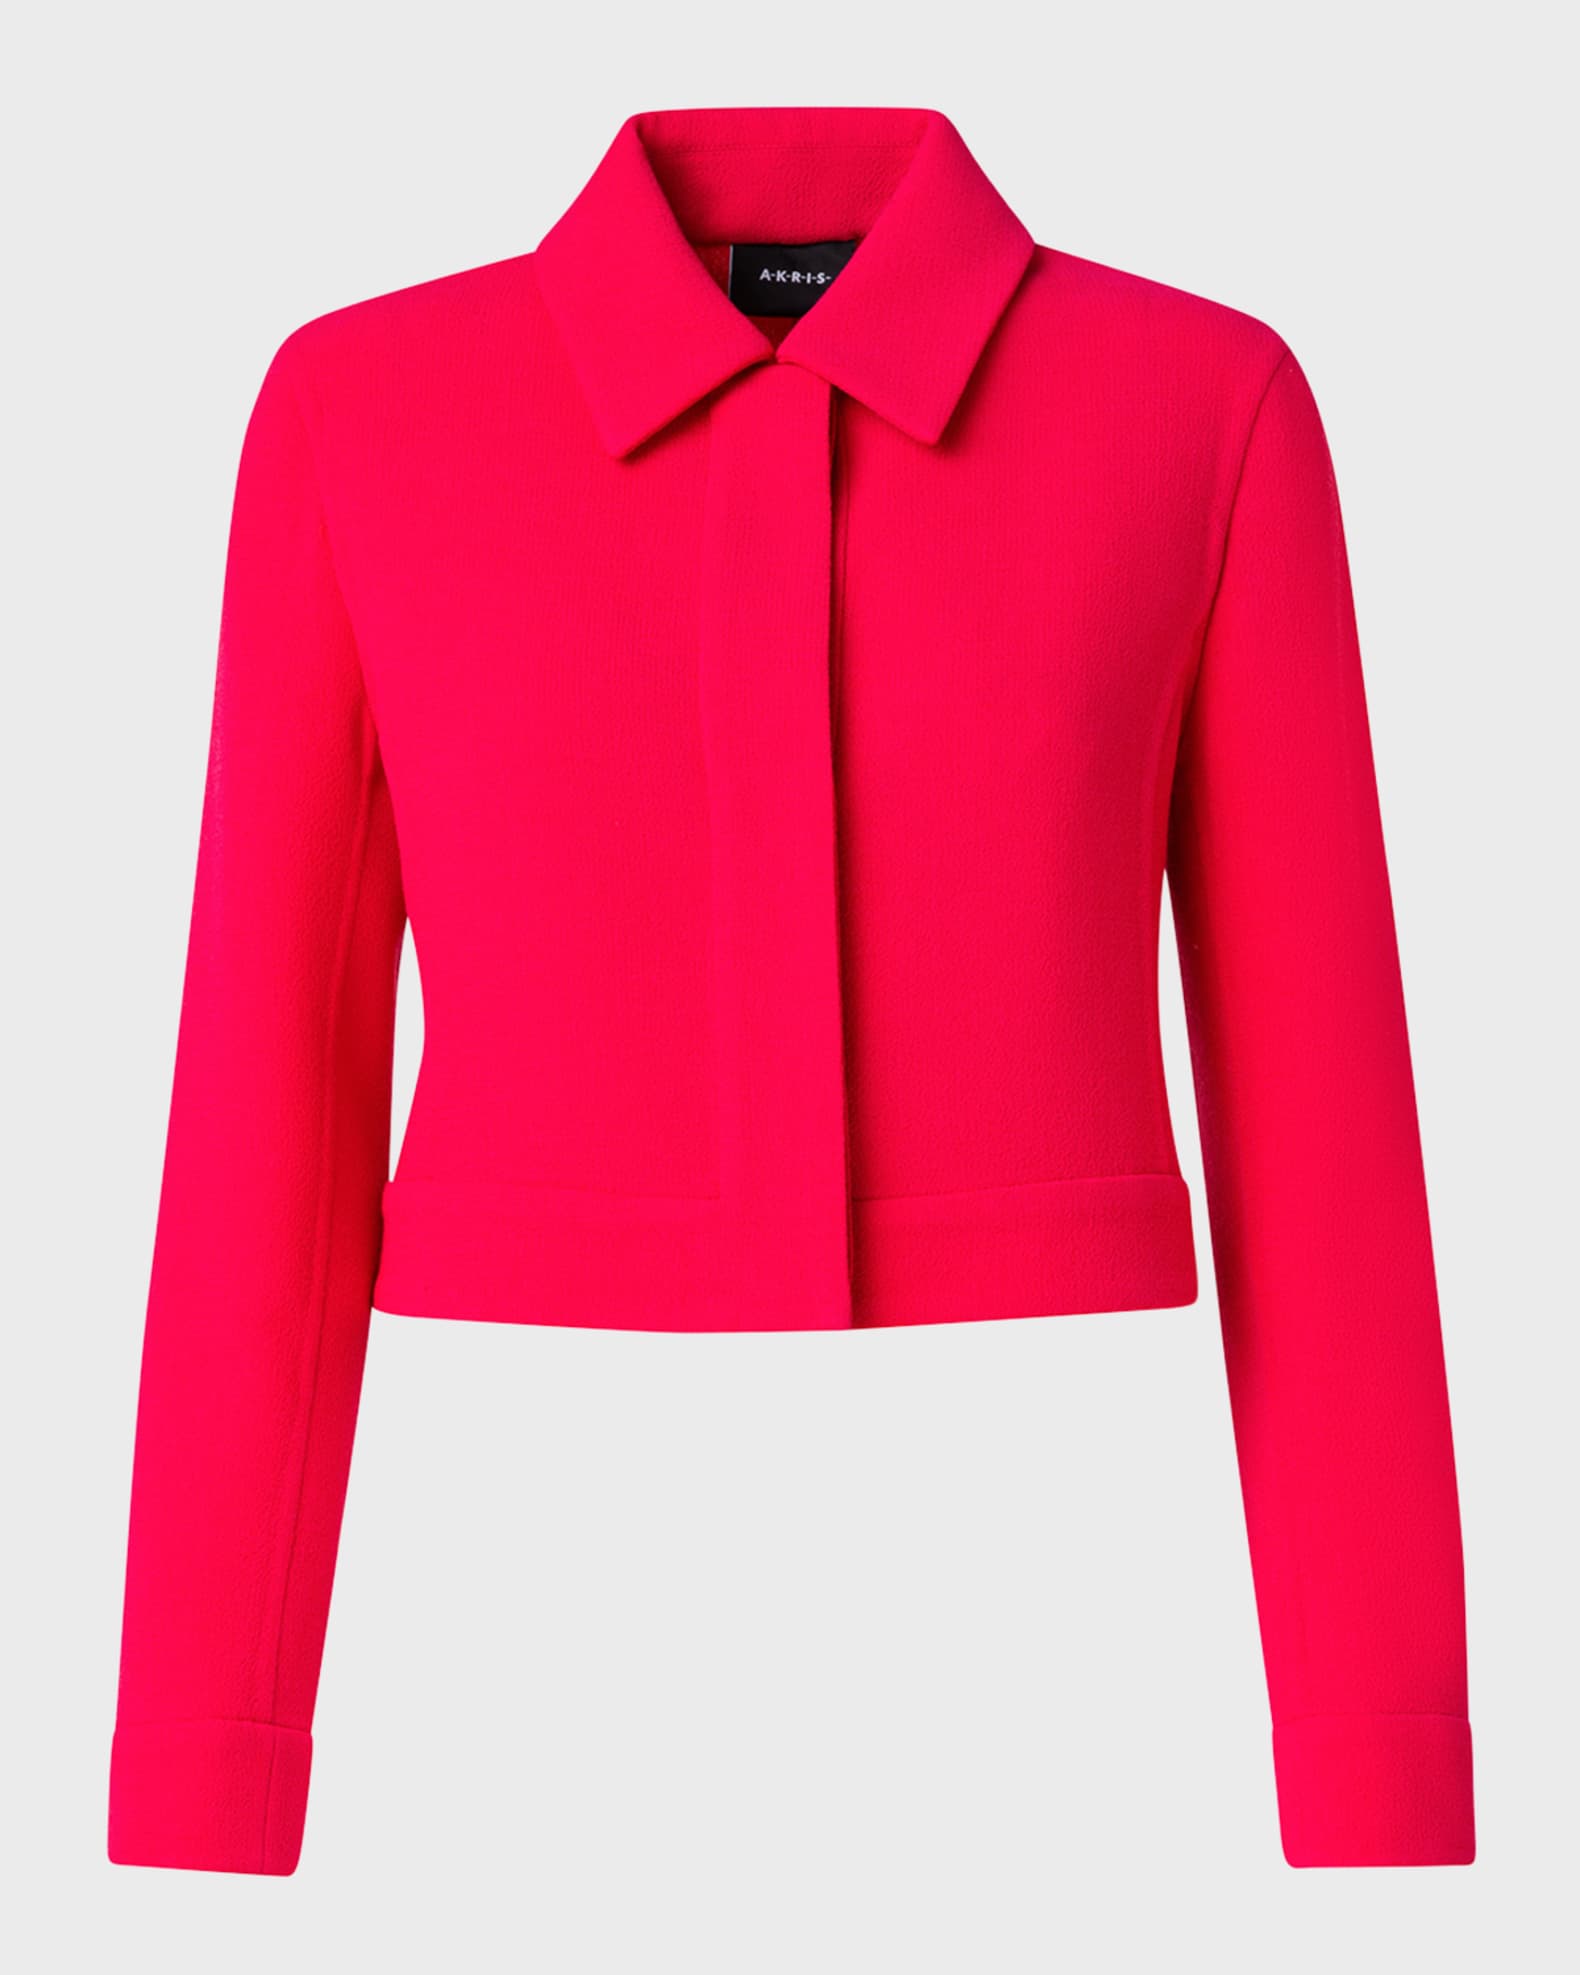 Akris Wool Crepe Short Jacket with Contrast Trimming | Neiman Marcus